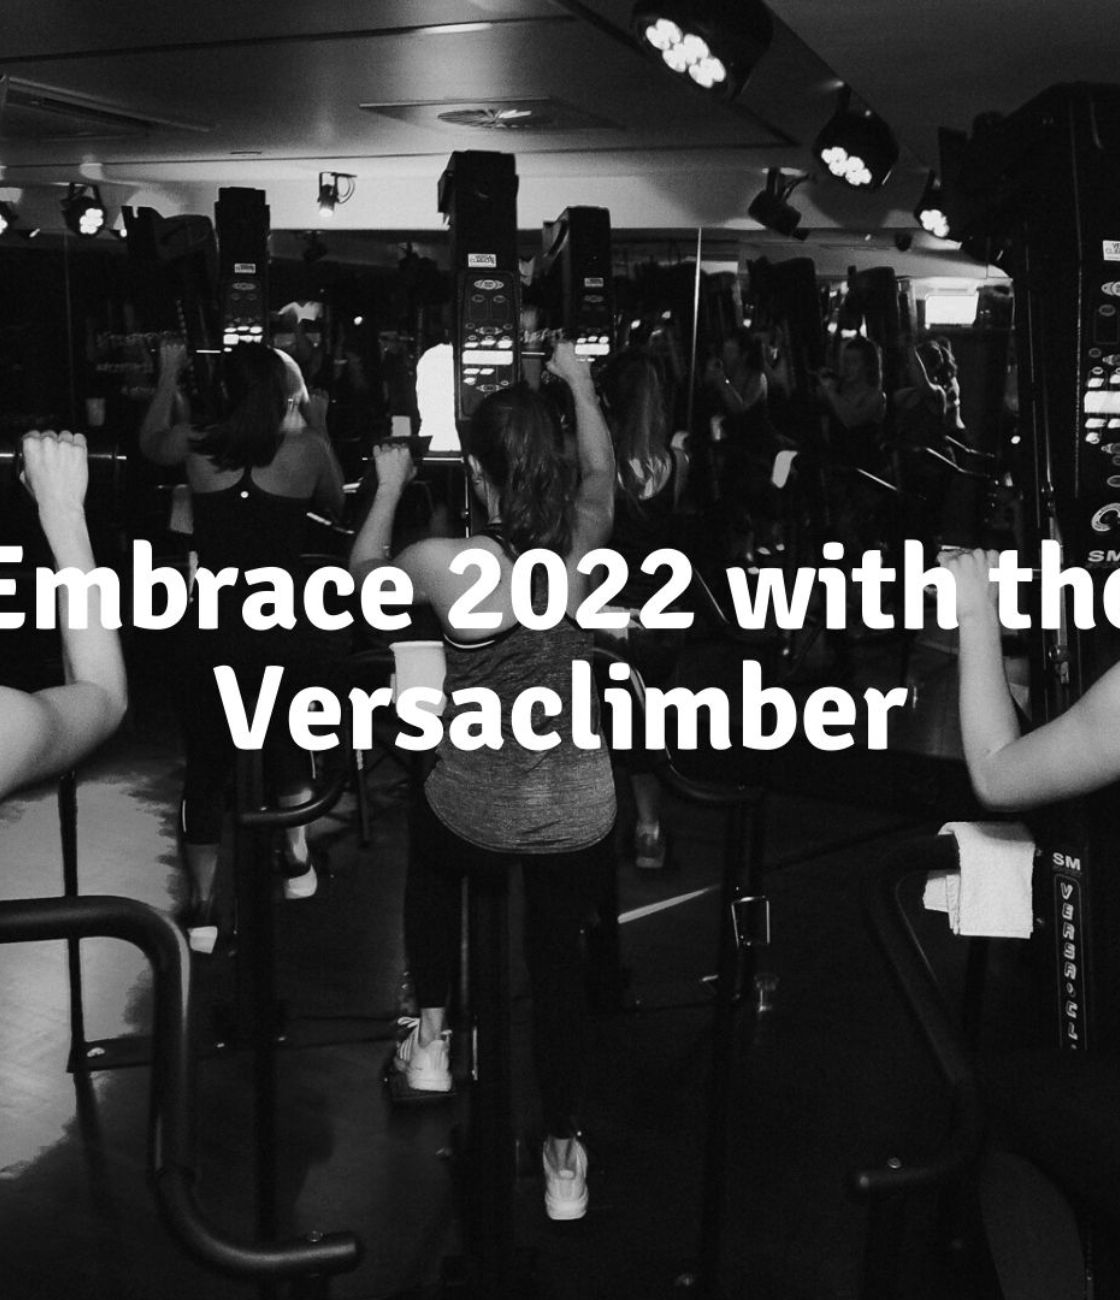 <p>Embrace 2022 with the Versaclimber</p>
